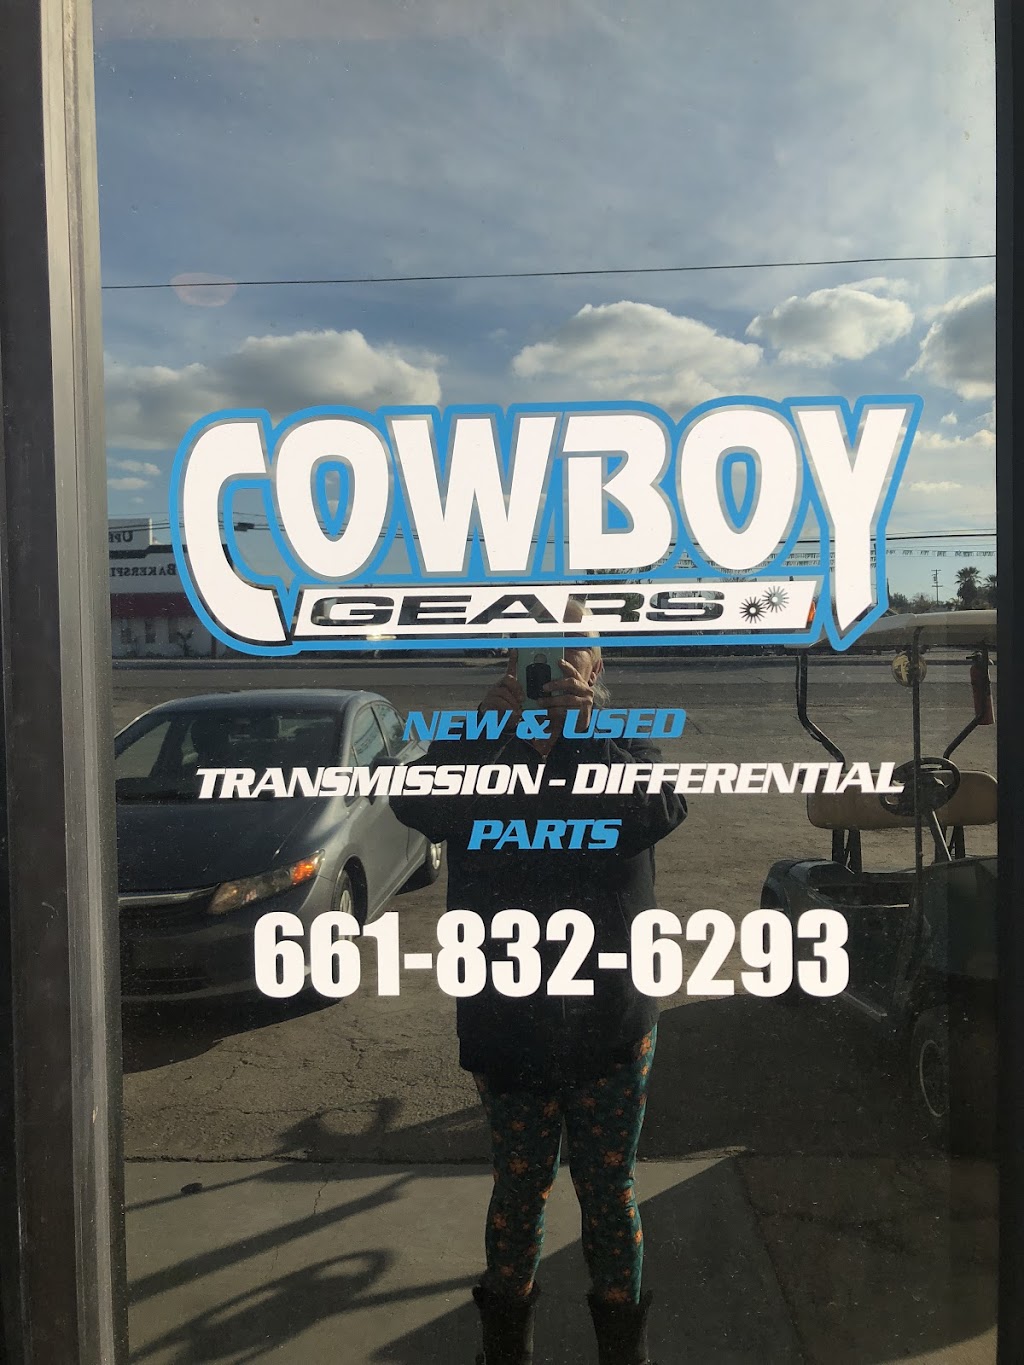 Cowboy Gears | 1636 S Union Ave, Bakersfield, CA 93307 | Phone: (661) 832-6293